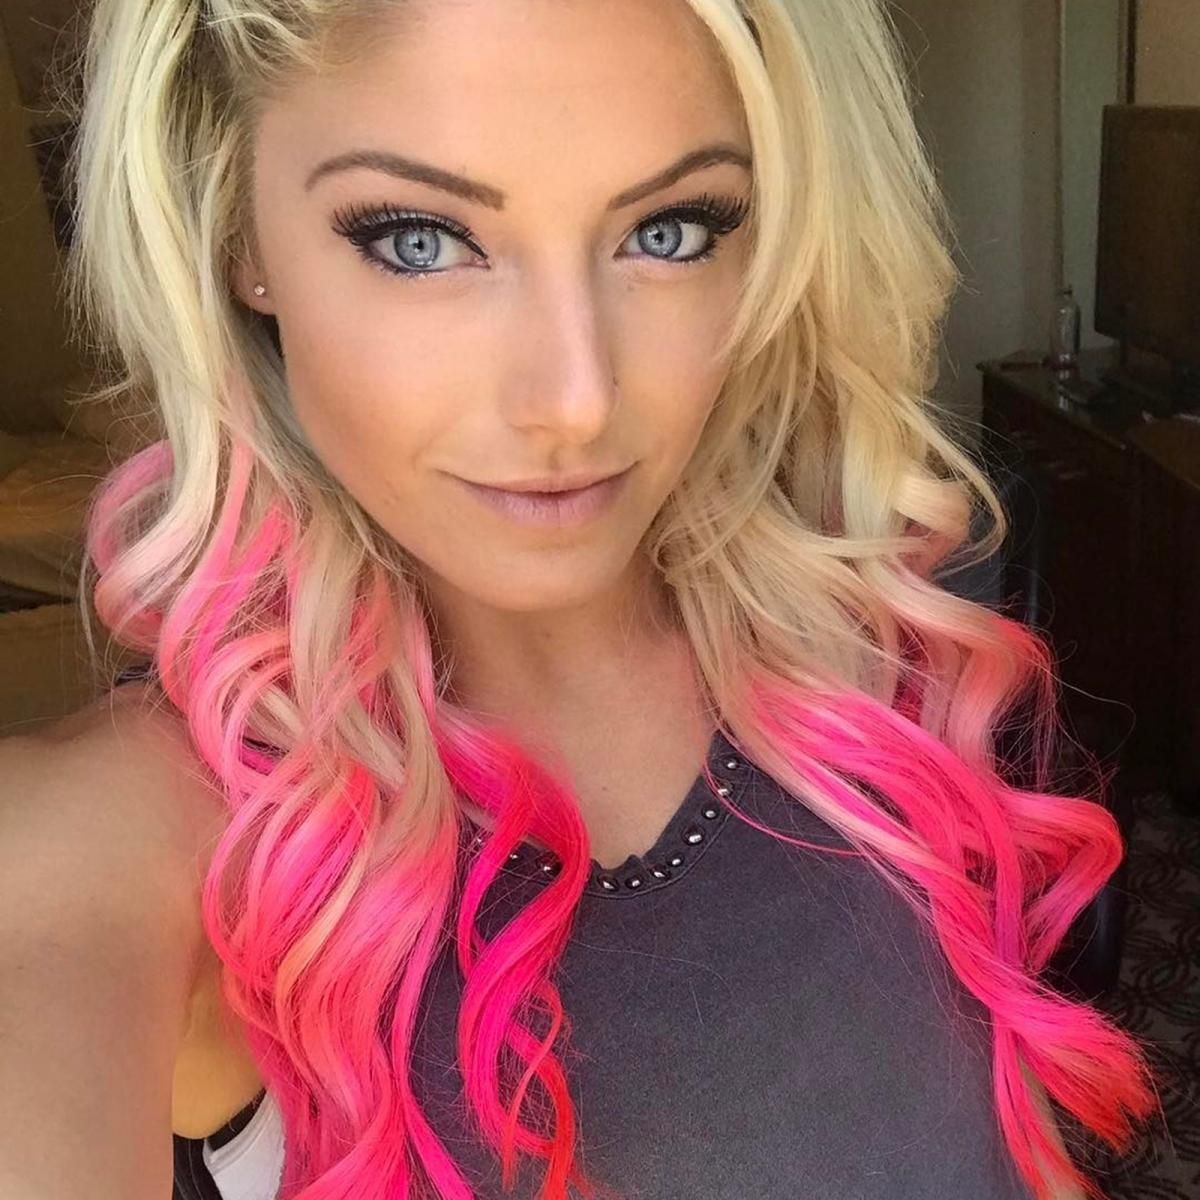 ALEXA BLISS - Instagram Picture and Video 01/12/2019. 